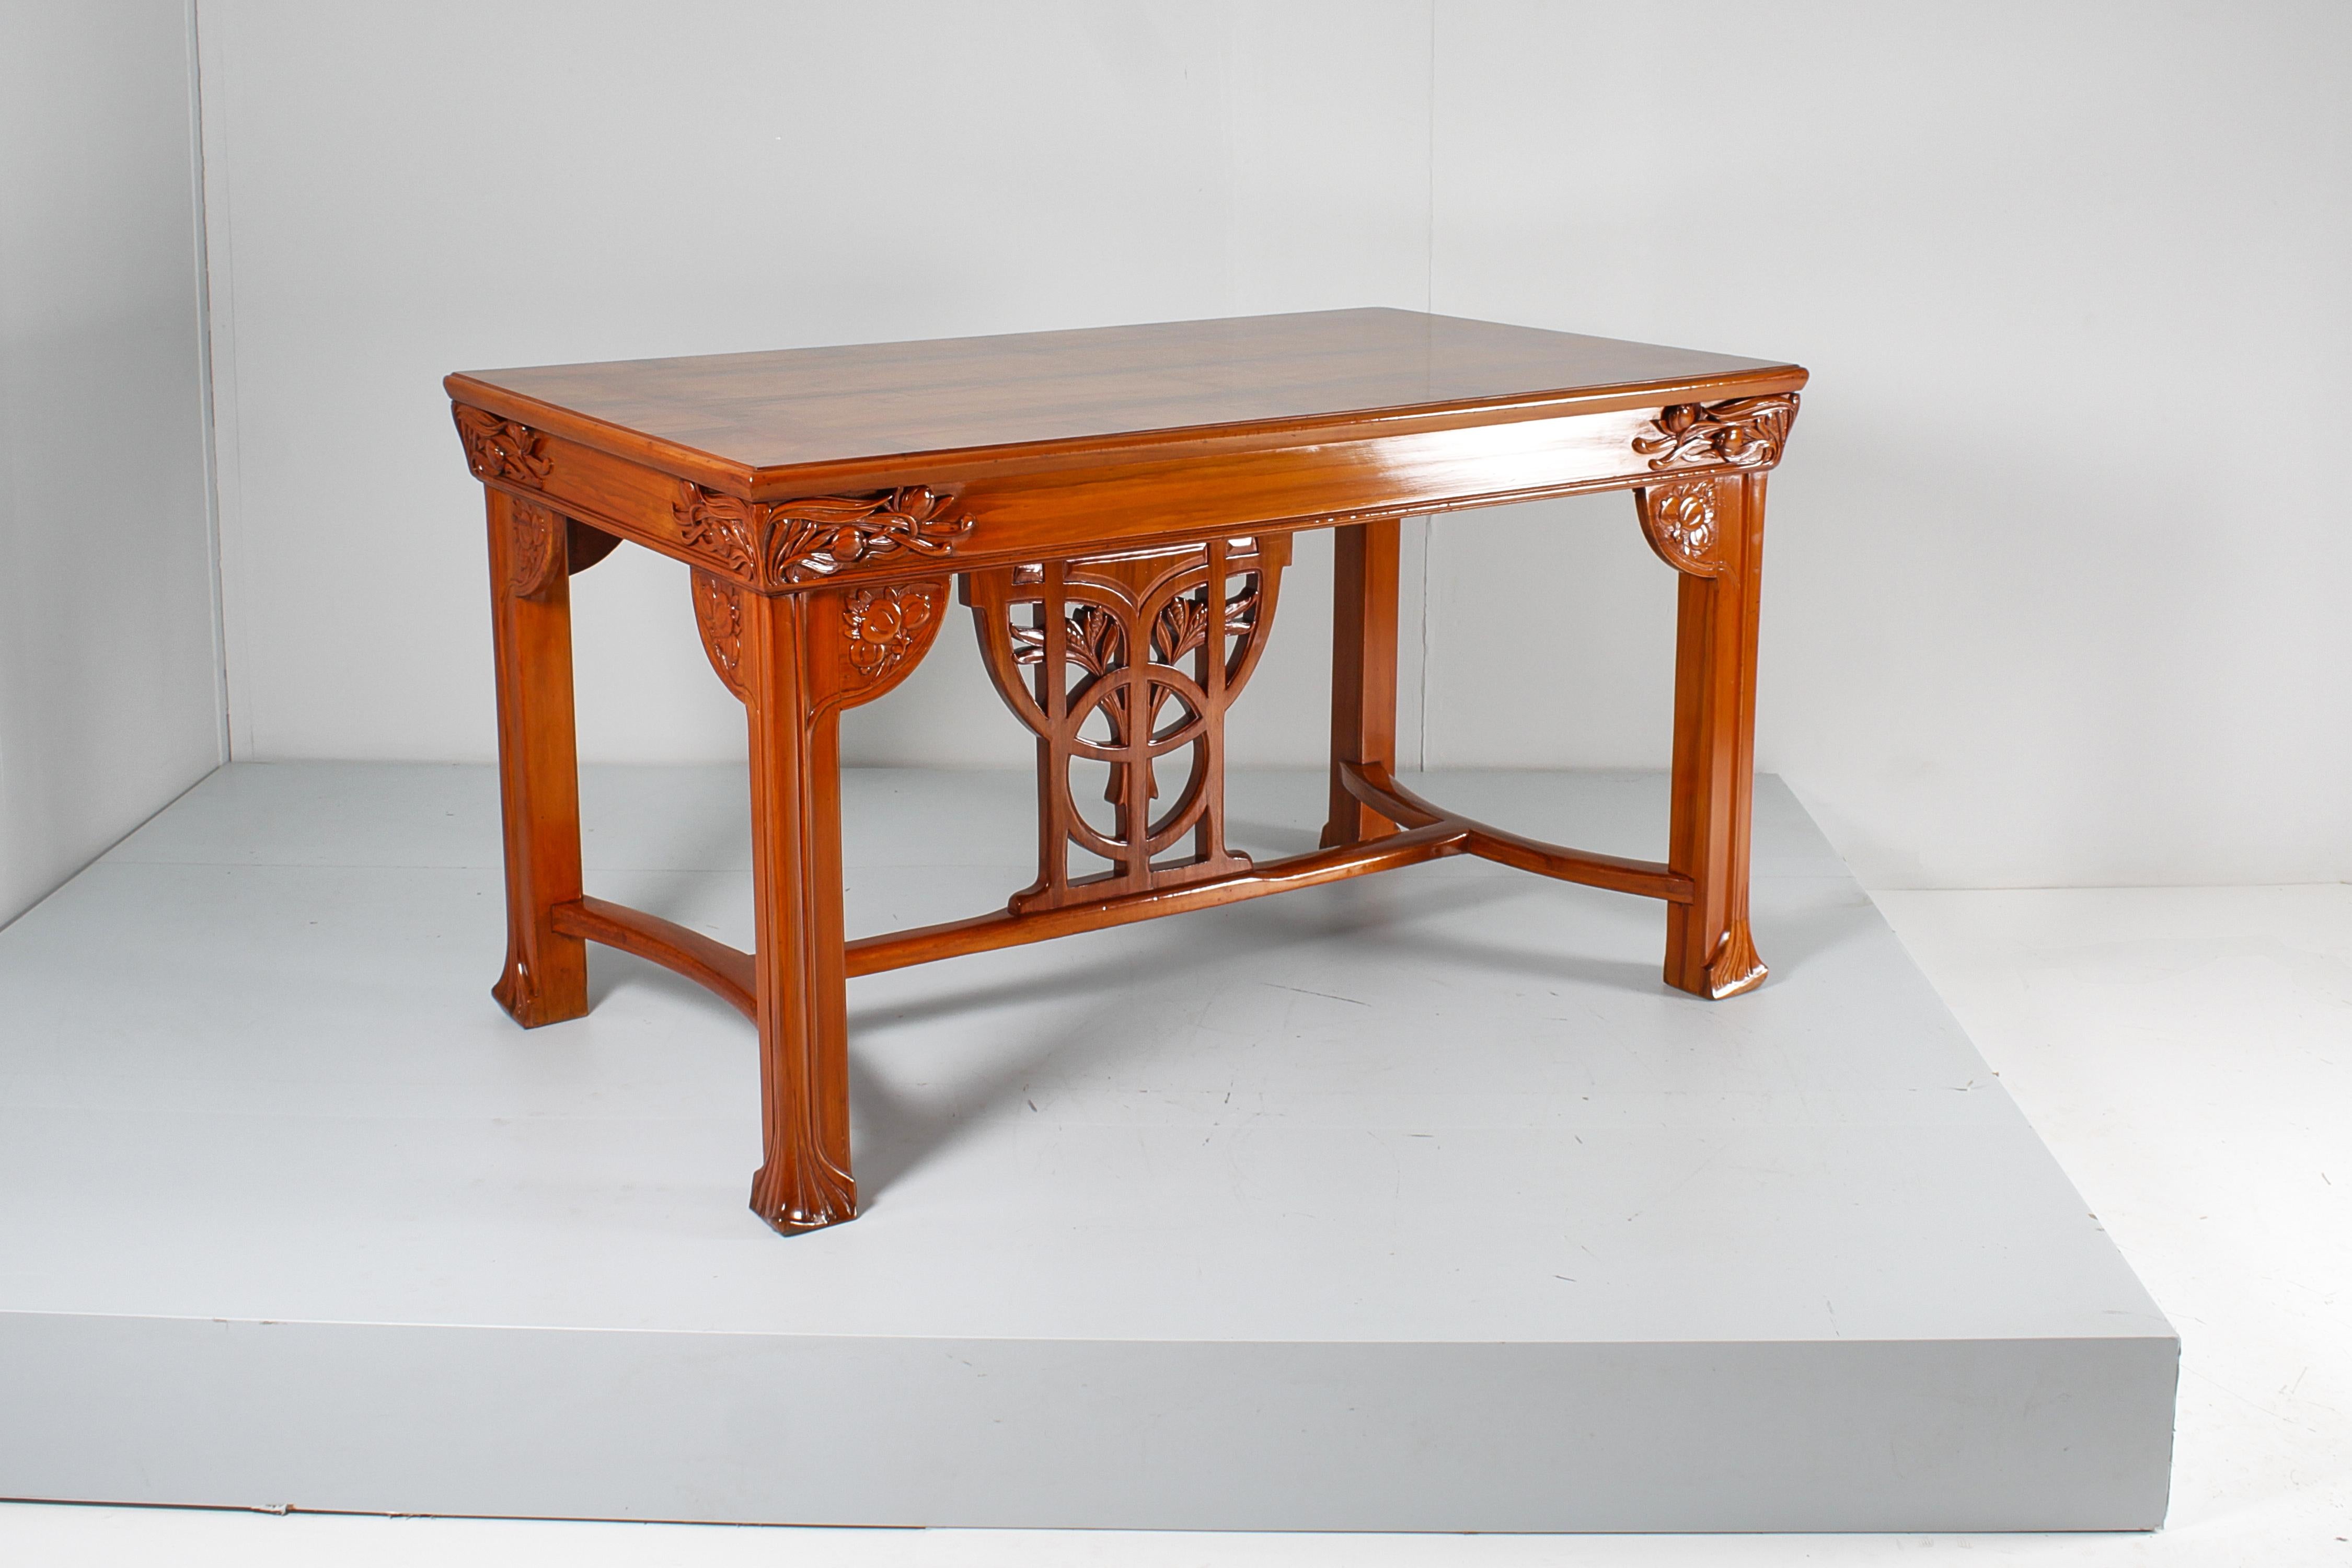 Art Nouveau V. Ducrot Restored Inlaid and Carved Wood Table 1900 Italy In Good Condition For Sale In Palermo, IT